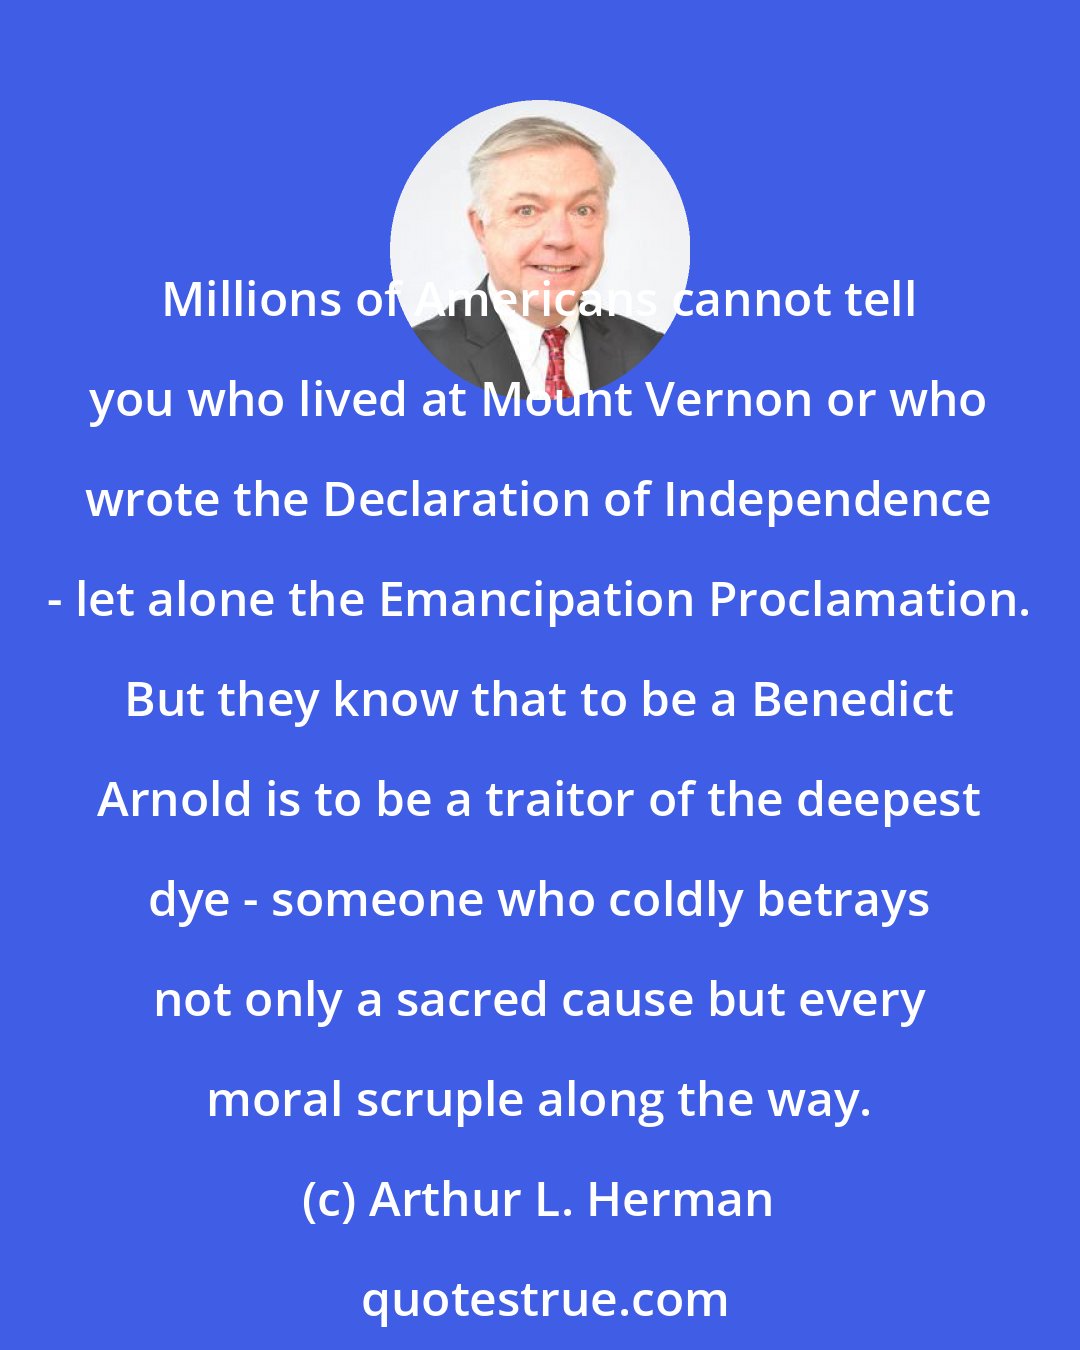 Arthur L. Herman: Millions of Americans cannot tell you who lived at Mount Vernon or who wrote the Declaration of Independence - let alone the Emancipation Proclamation. But they know that to be a Benedict Arnold is to be a traitor of the deepest dye - someone who coldly betrays not only a sacred cause but every moral scruple along the way.